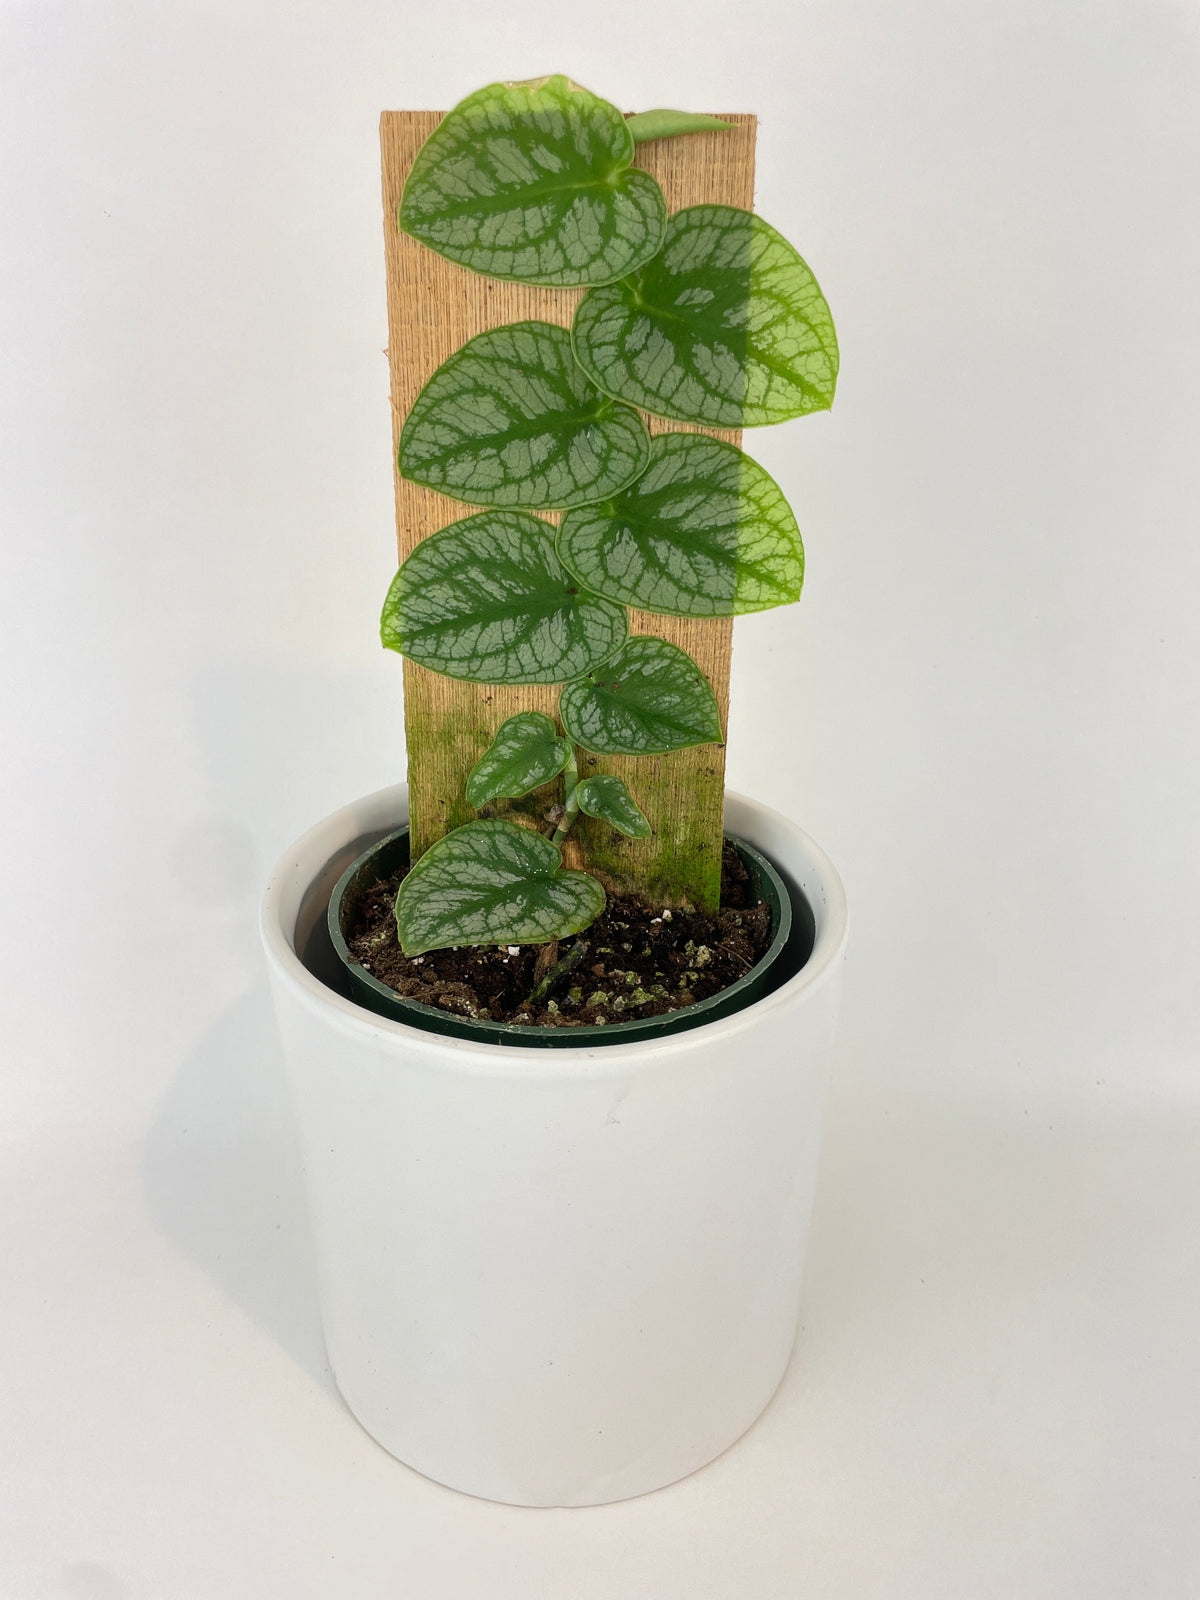 Monstera Dubia by Bumble Plants